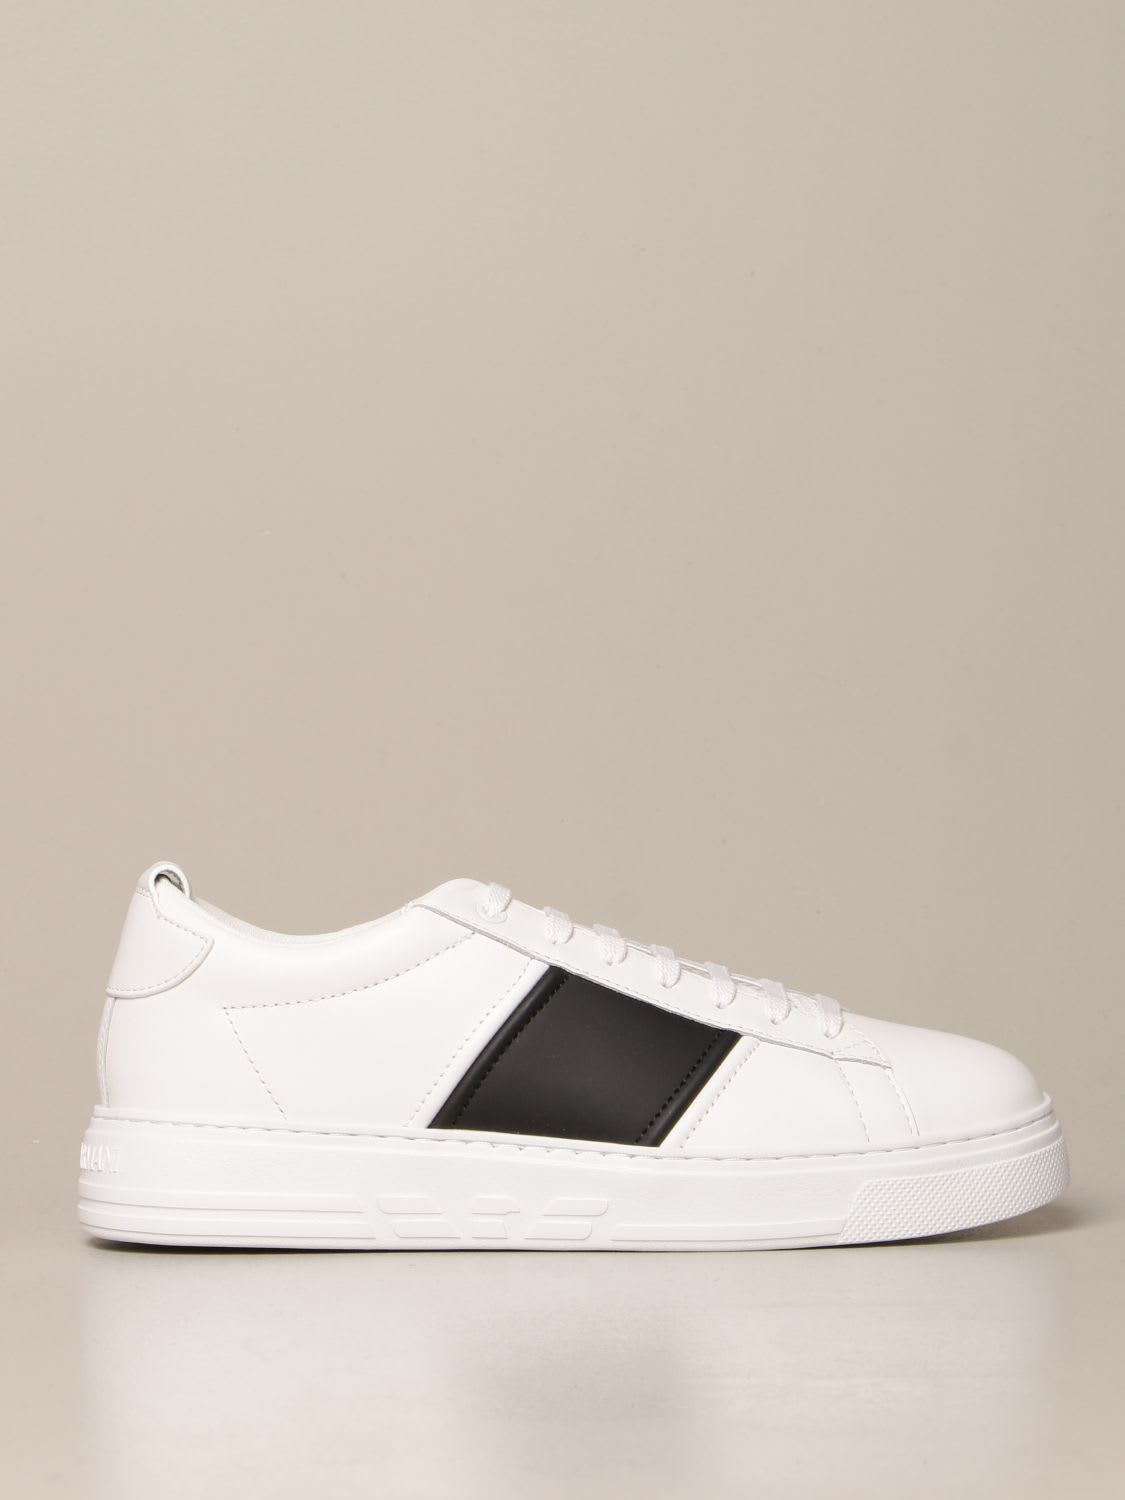 Emporio Armani Sneakers Emporio Armani Sneakers In Leather With Contrasting Band